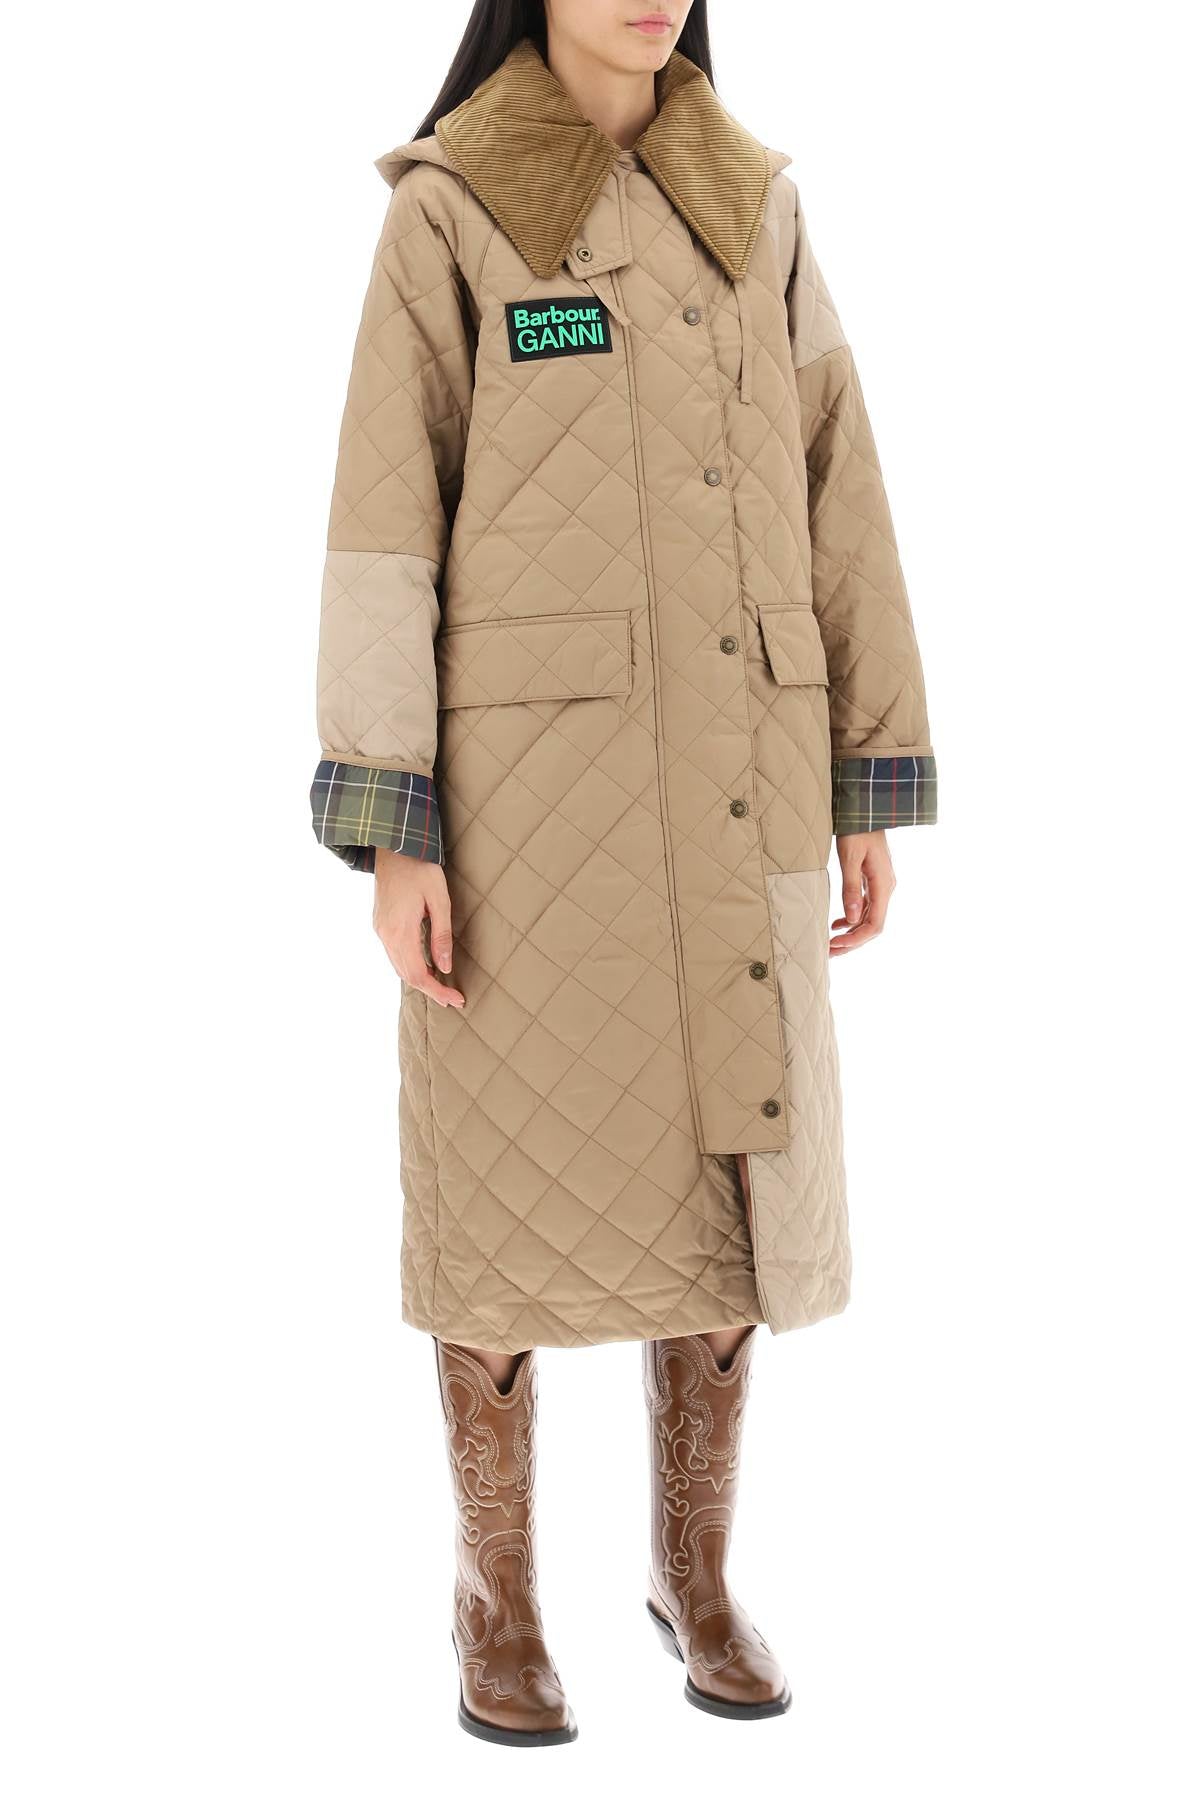 Barbour x ganni burghley quilted trench coat-1